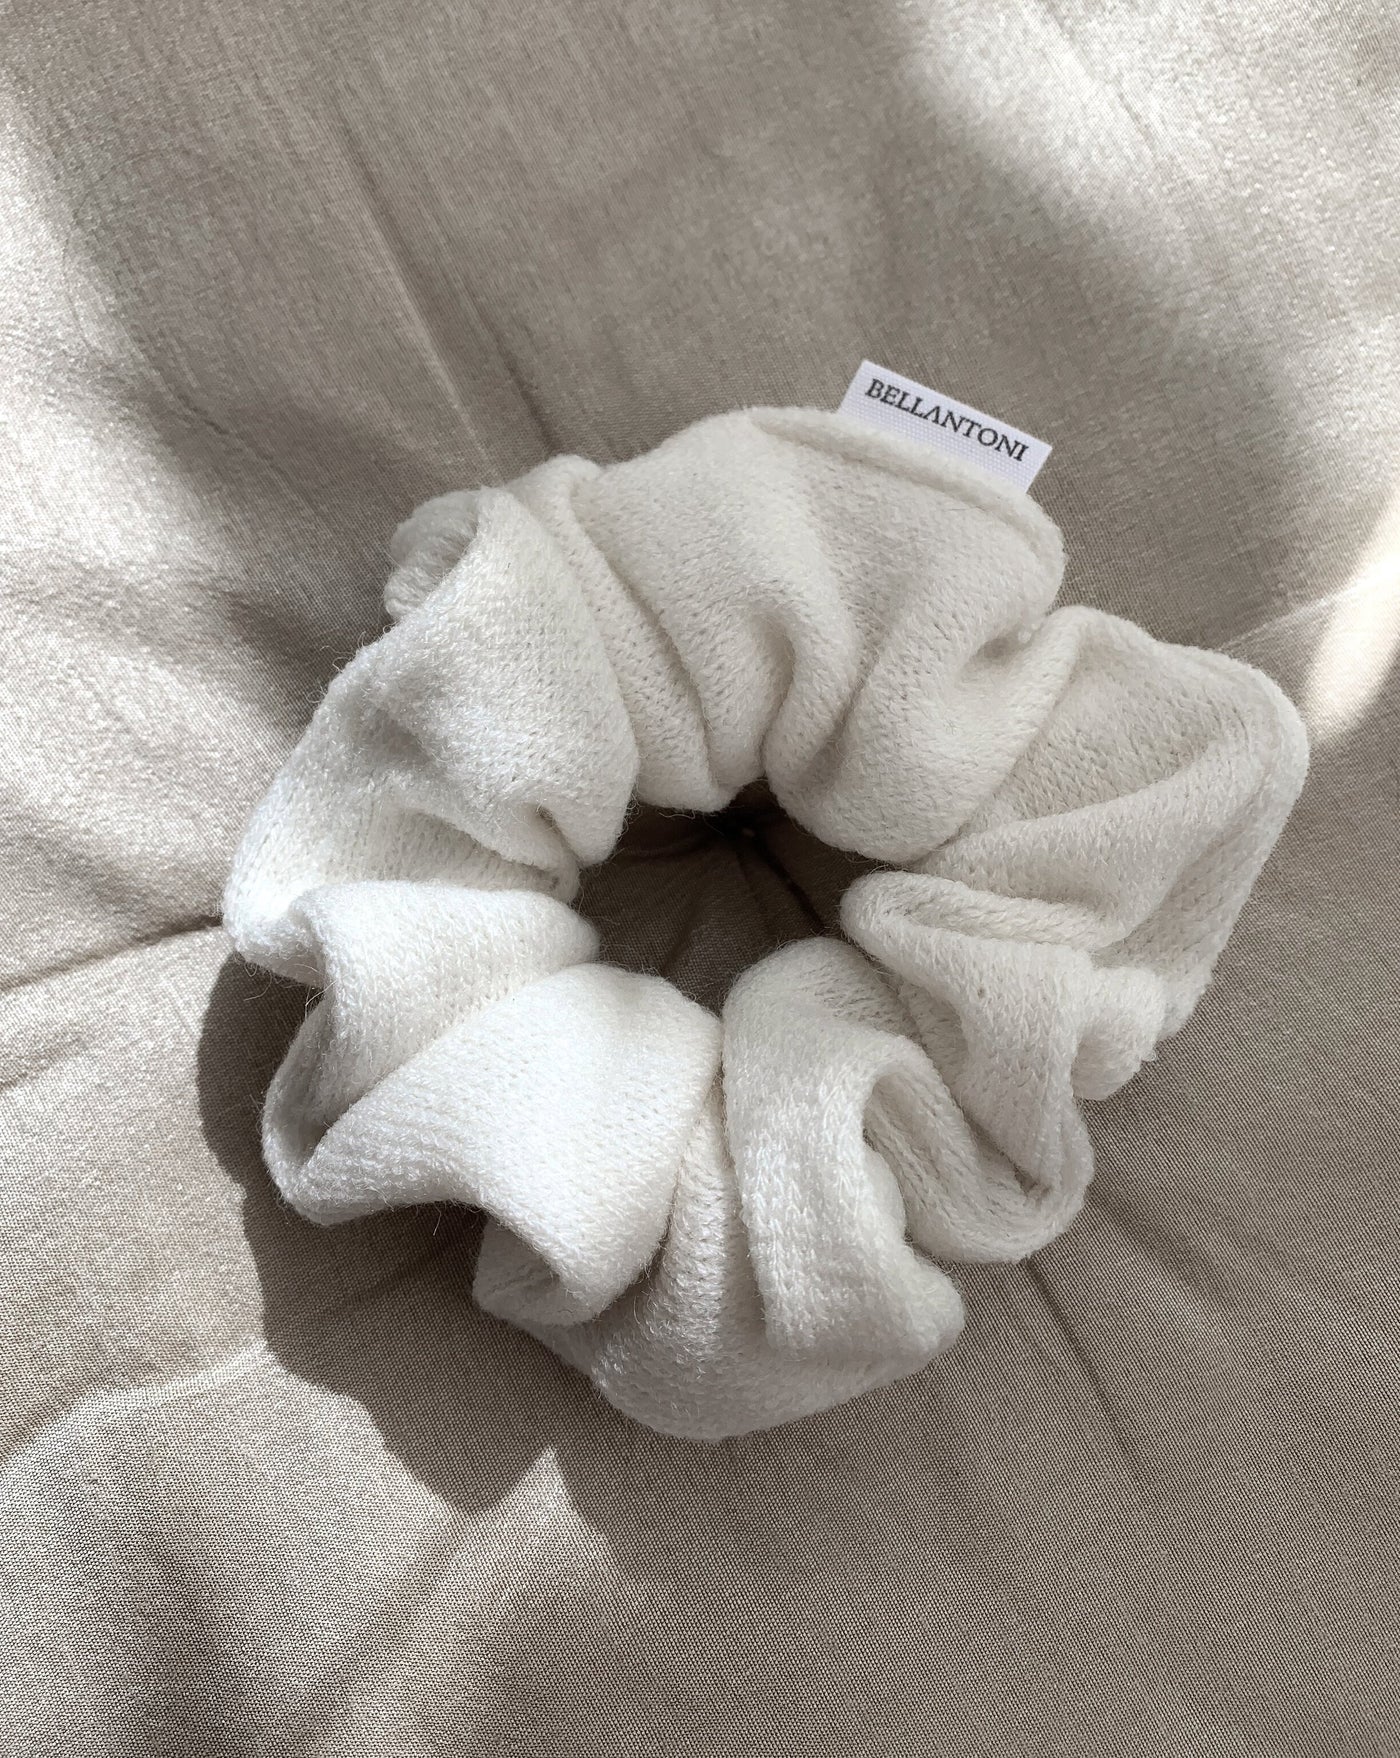 Cream oversized reclaimed sweater fabric scrunchie ethically sewn in Canada.